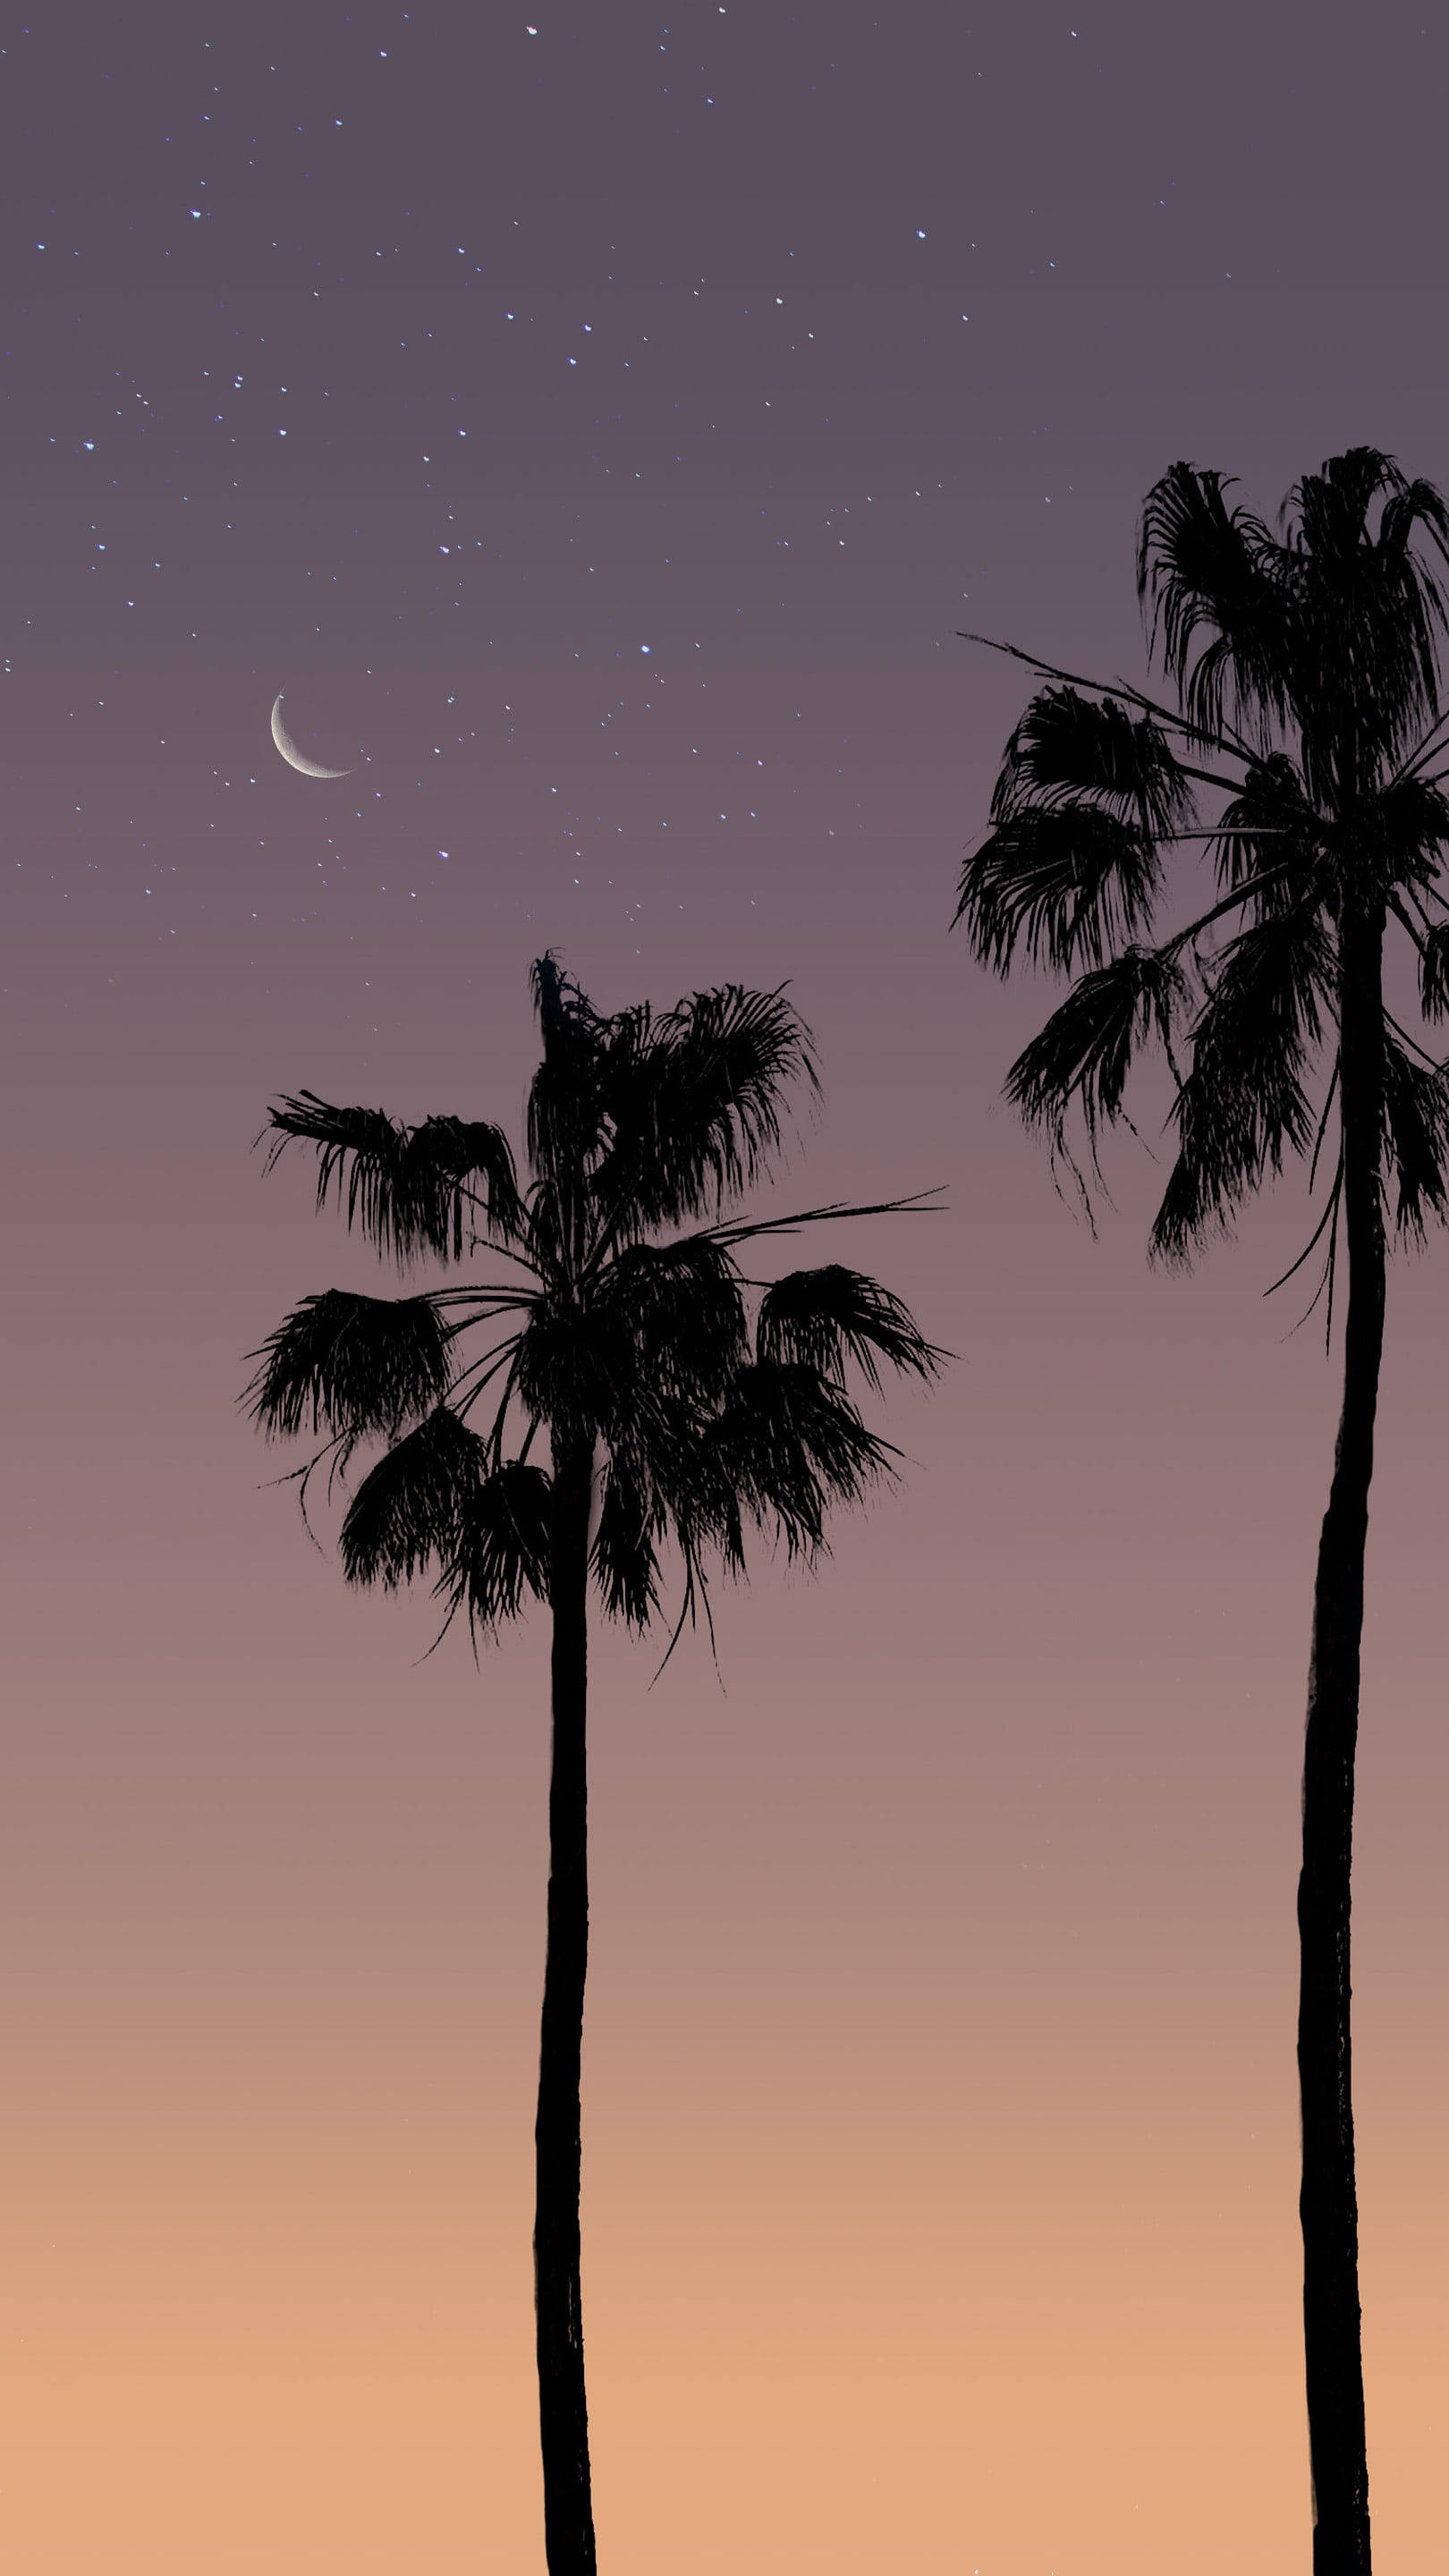 Aesthetic Sunset With Coconut Tree Silhouettes Wallpaper